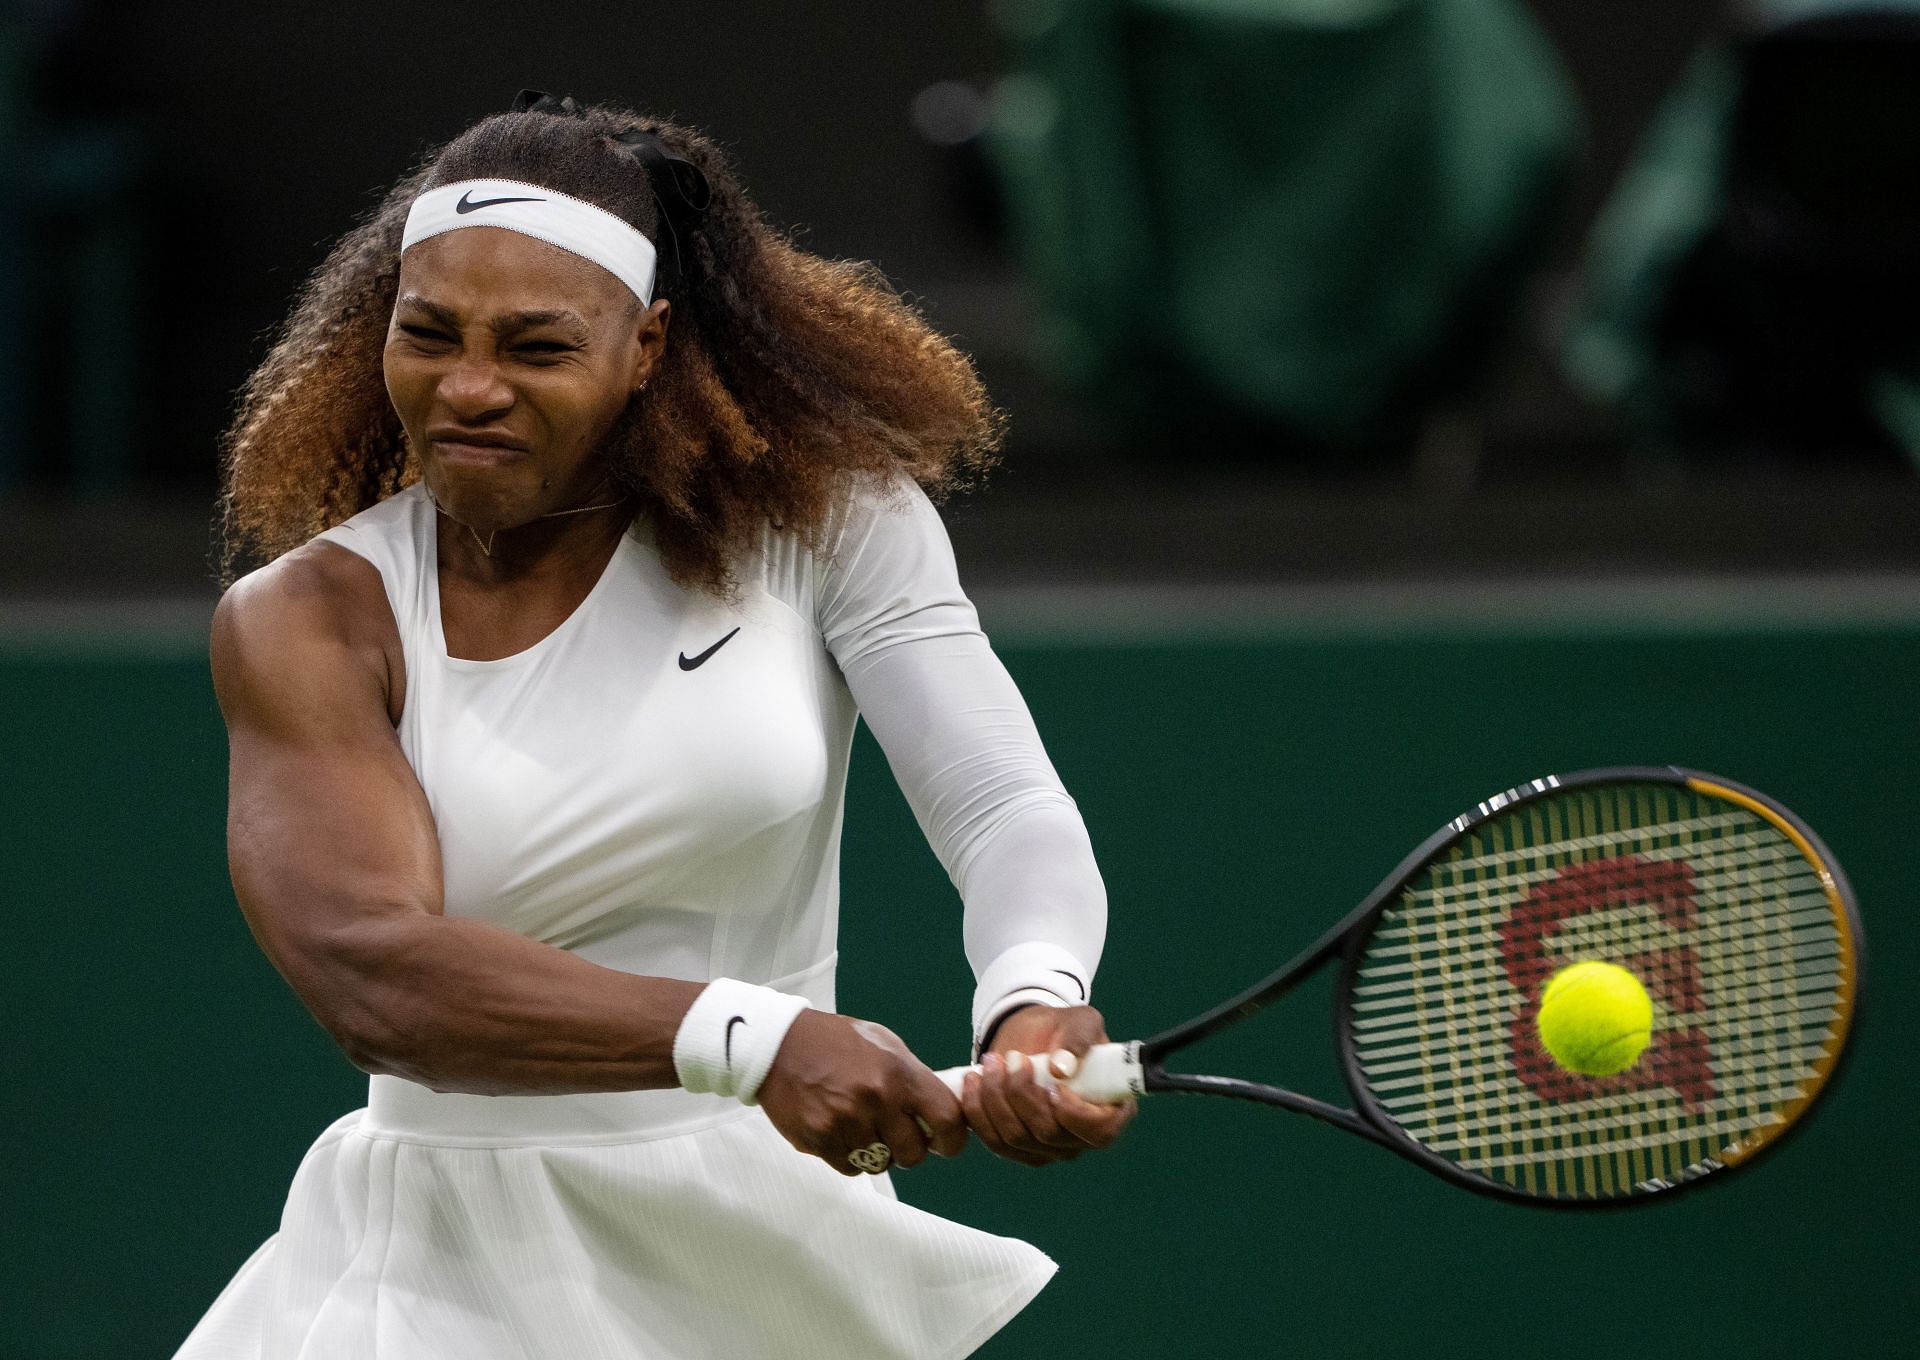 Serena Williams will compete at the Rothesay International in Eastbourne